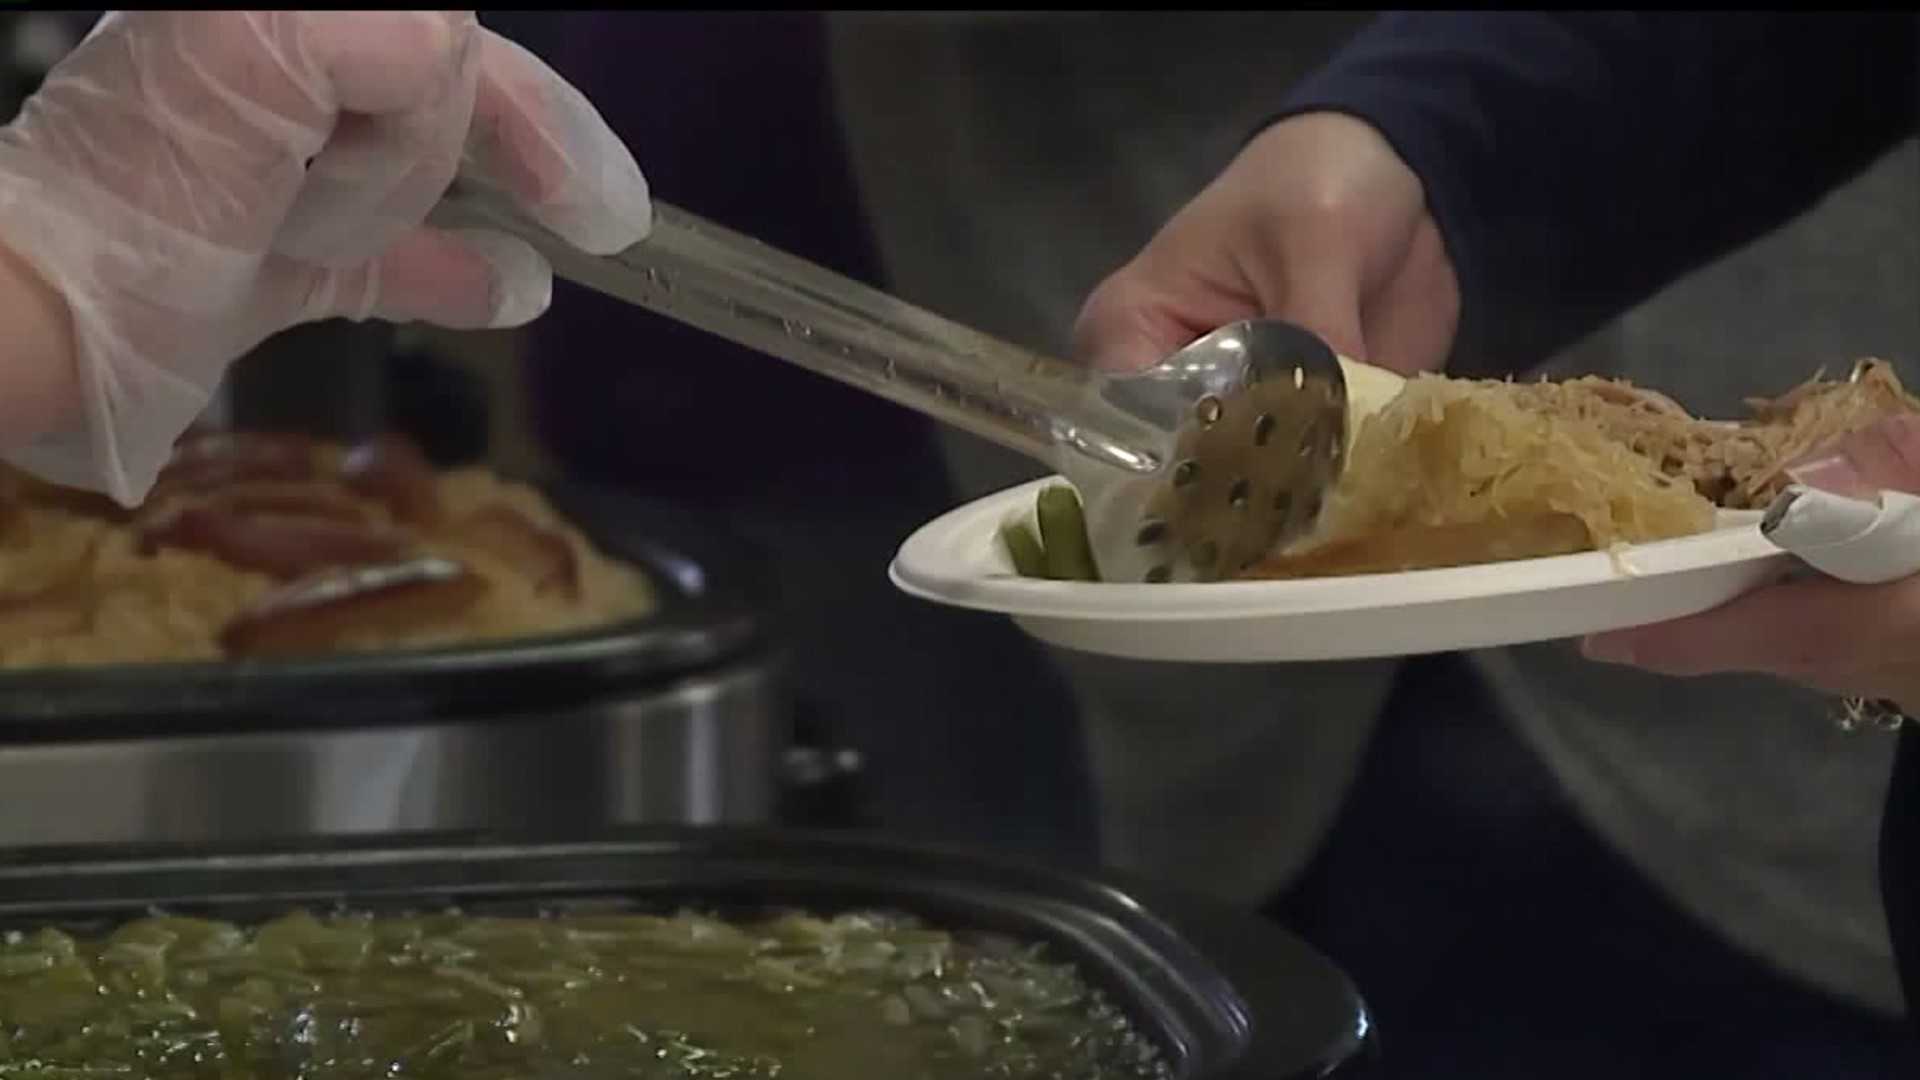 Volunteers will be serving the traditional New Year's Day meal to hundreds of people across South Central PA